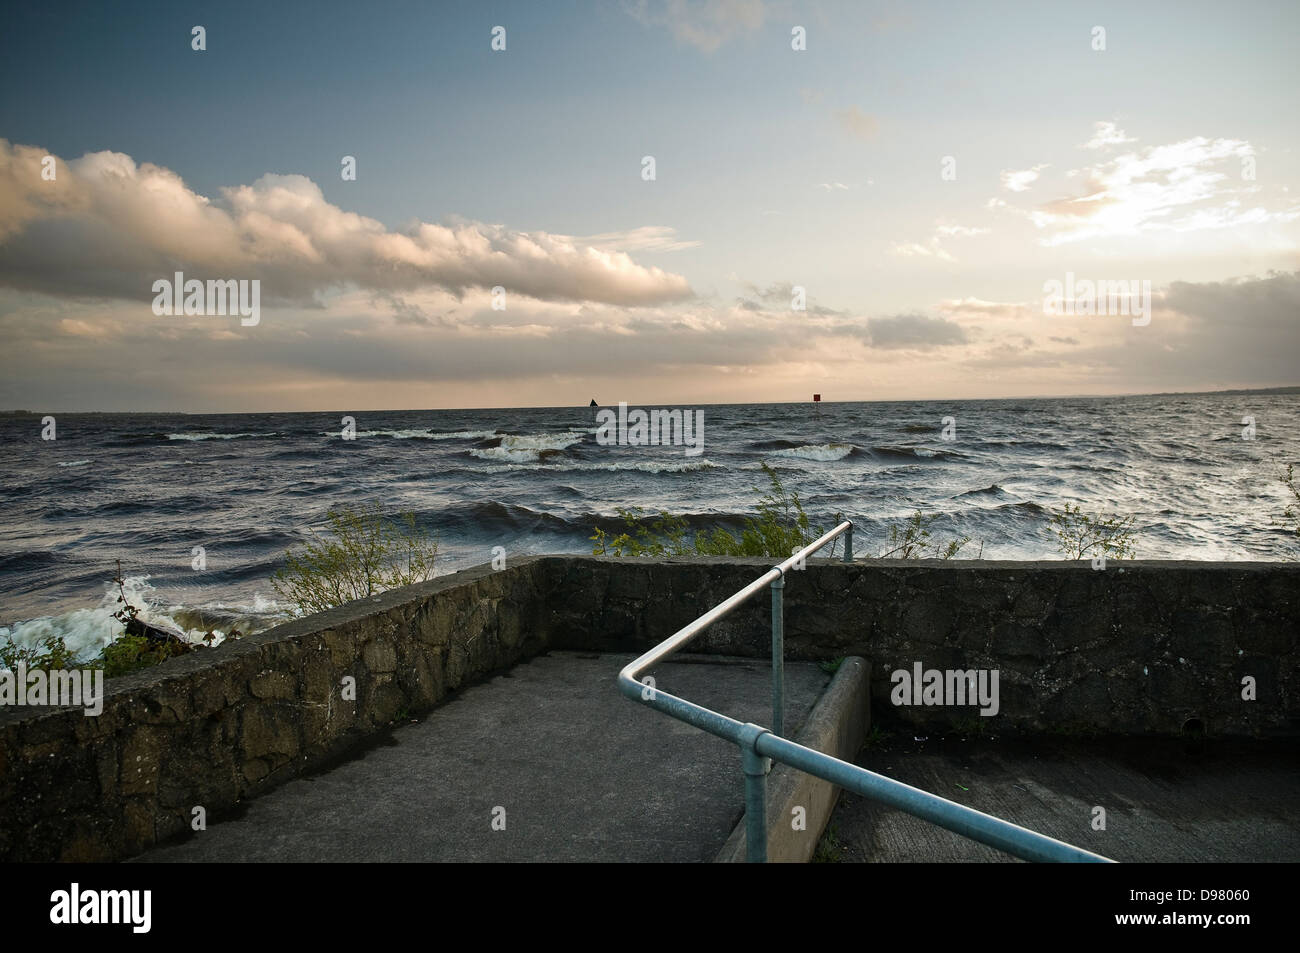 Viewing point on the banks of Lough Neagh, County Antrim, Northern Ireland, UK Stock Photo